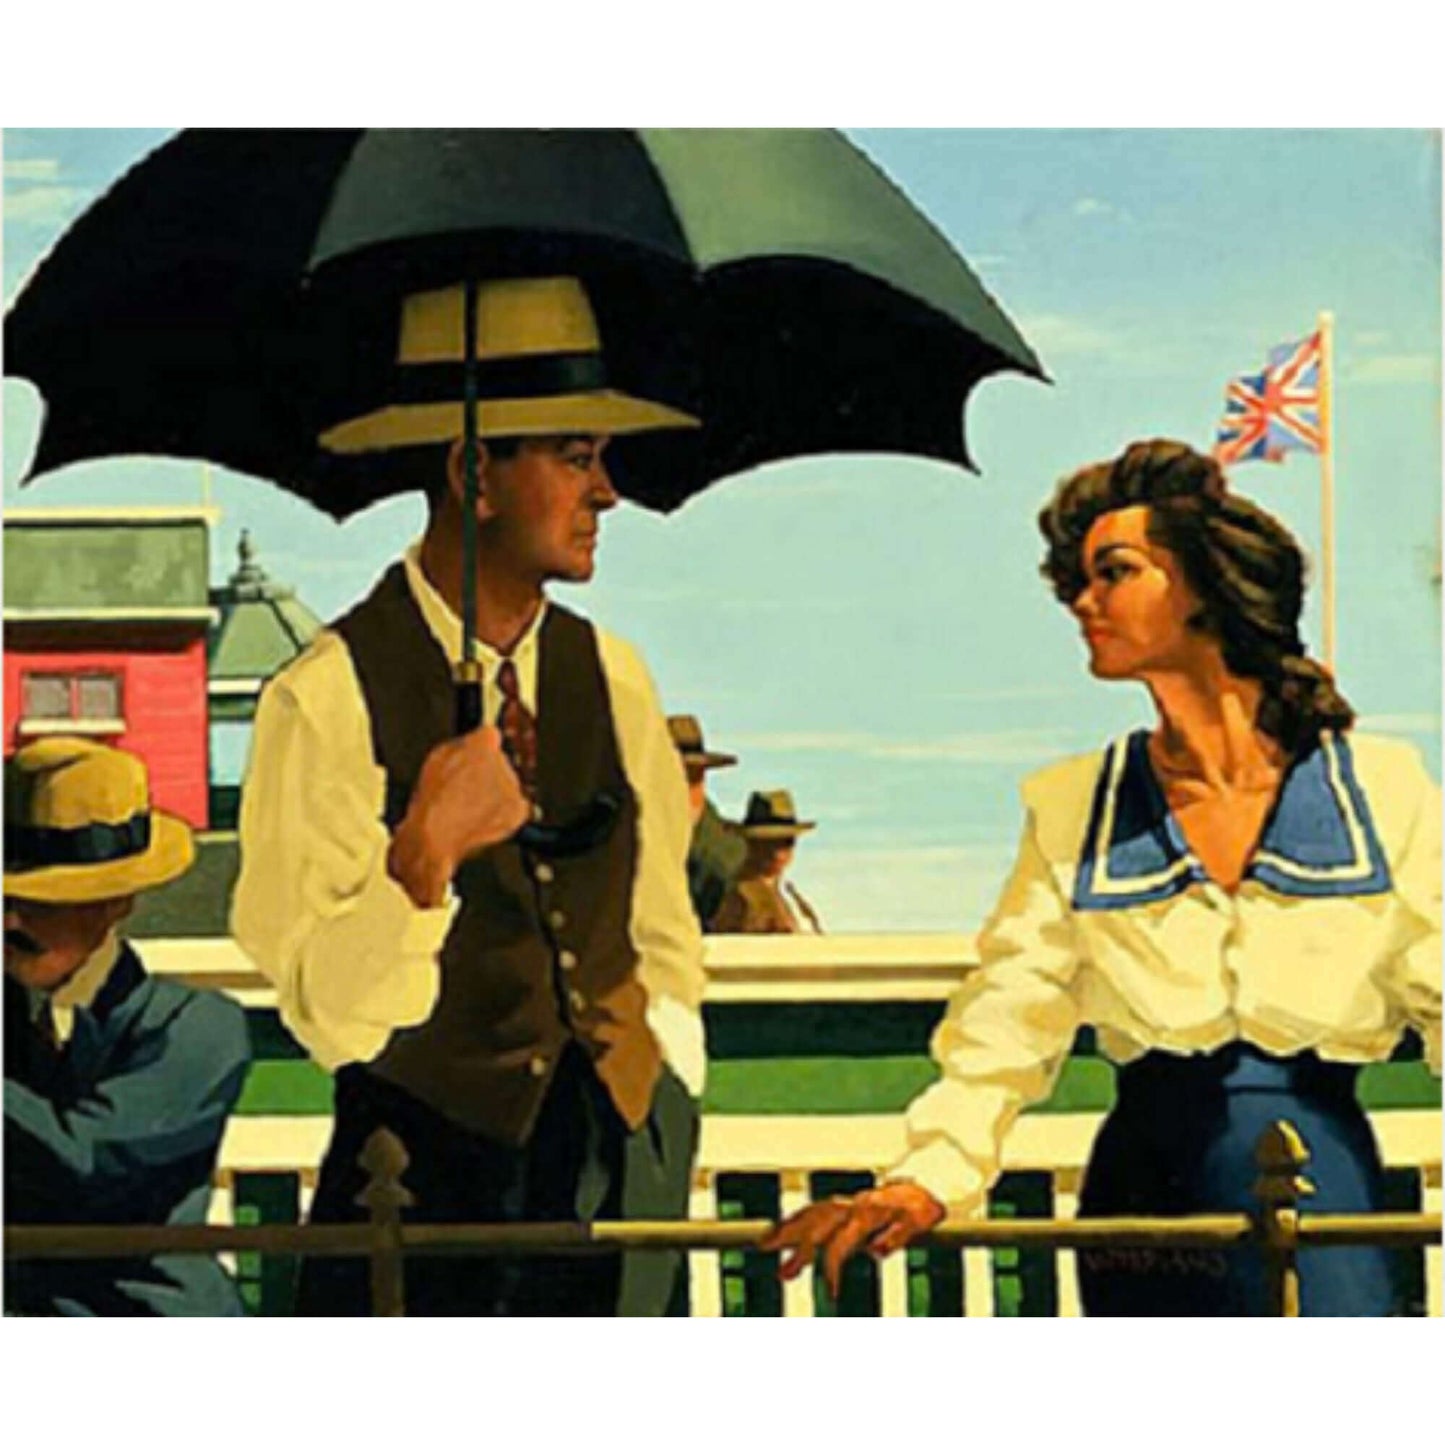 Load image into Gallery viewer, Summertime Blues  Print Jack Vettriano
